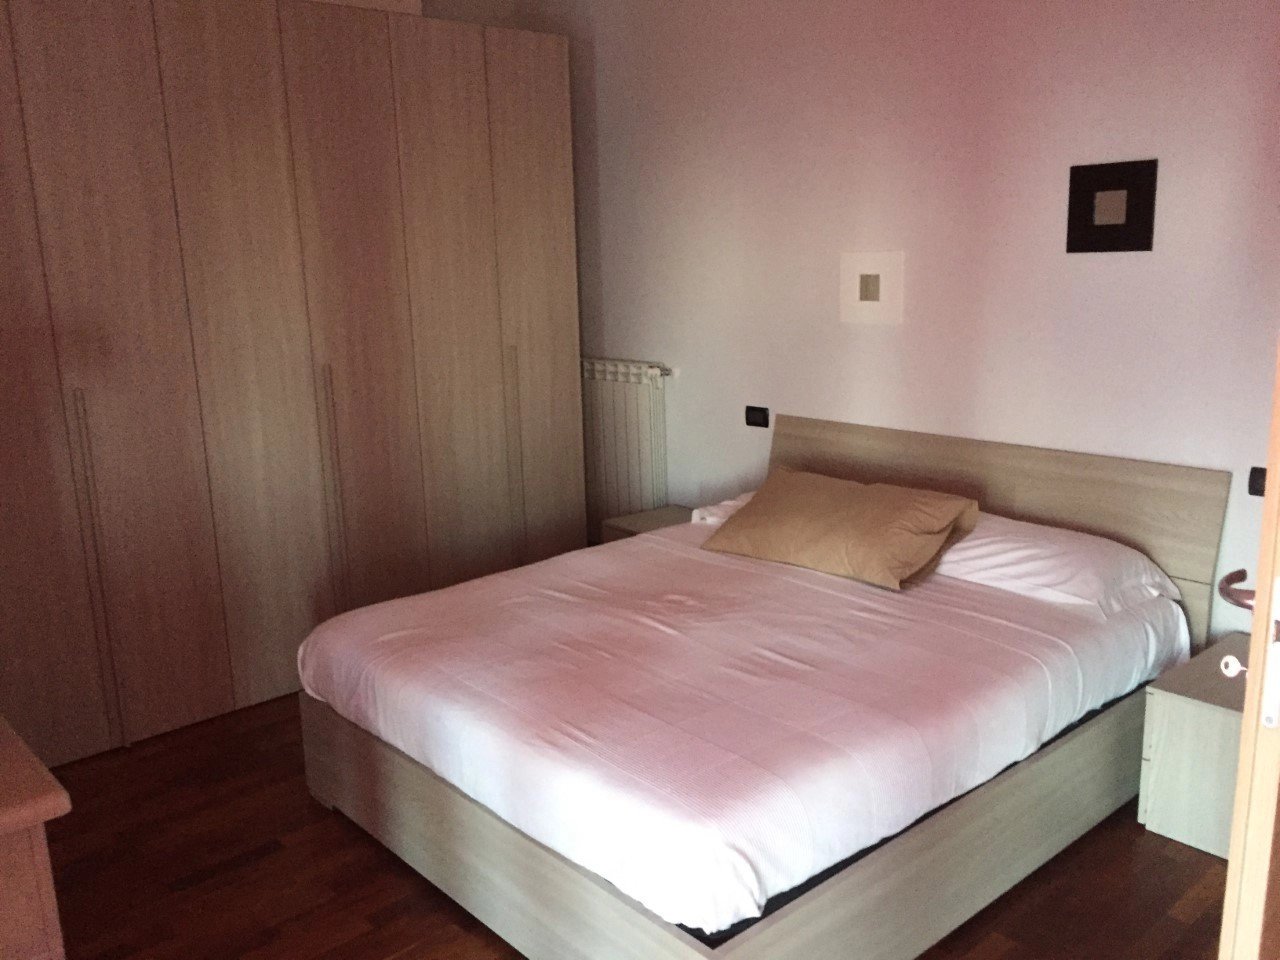 Sale Bed and breakfast - Città Sant'Angelo - Italy